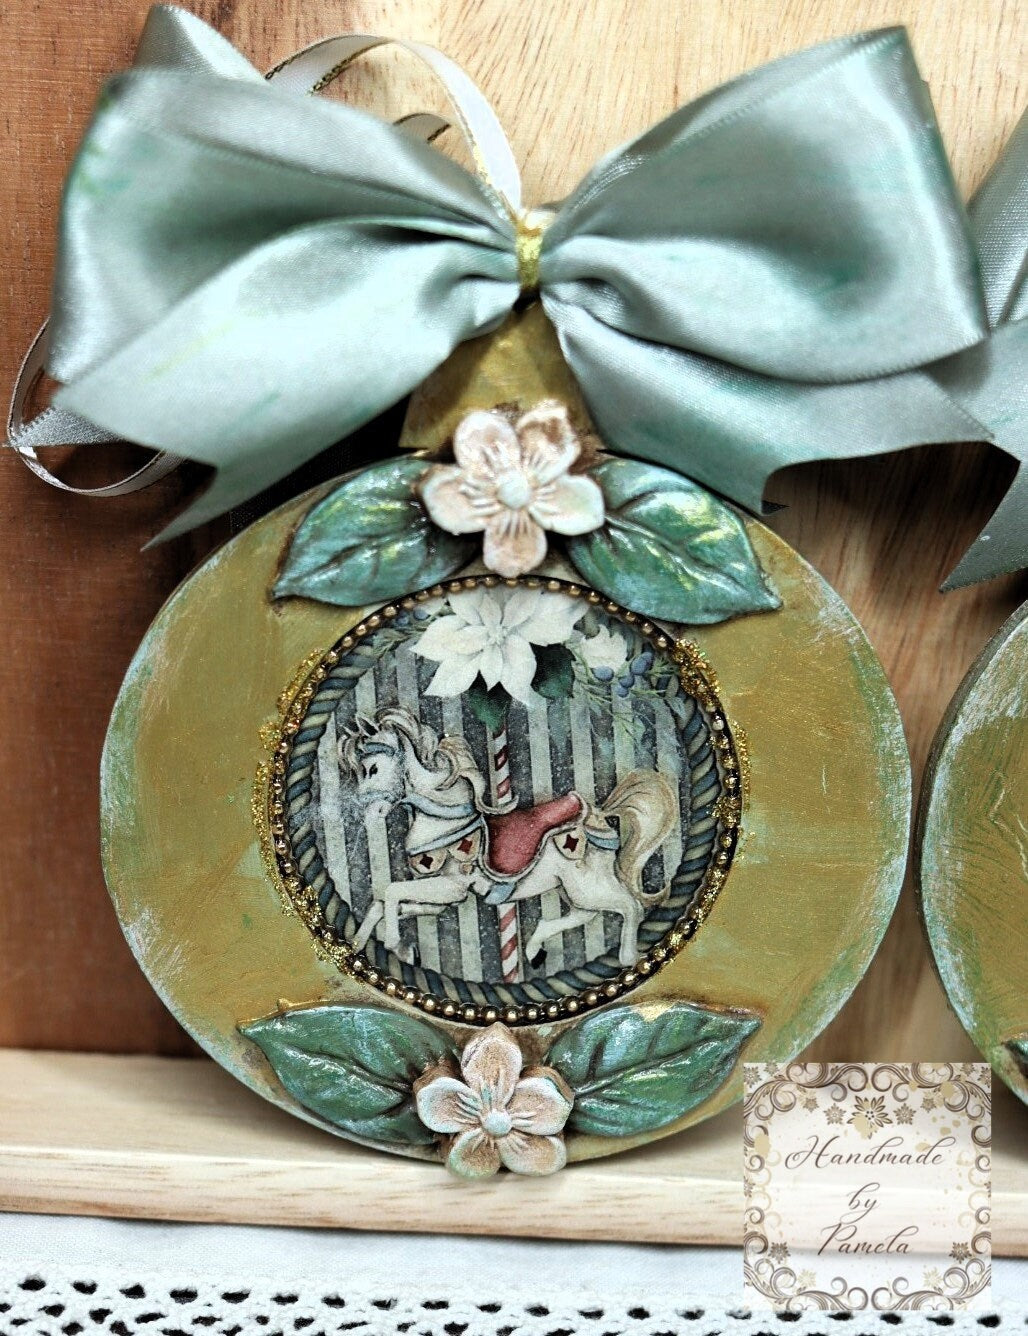 Handcrafted, Carousel Horses, Christmas Ornament Set 2, Decoupage, Mixed Media, Vintage Style Ornaments, Gold, Green, Handmade by Pamela